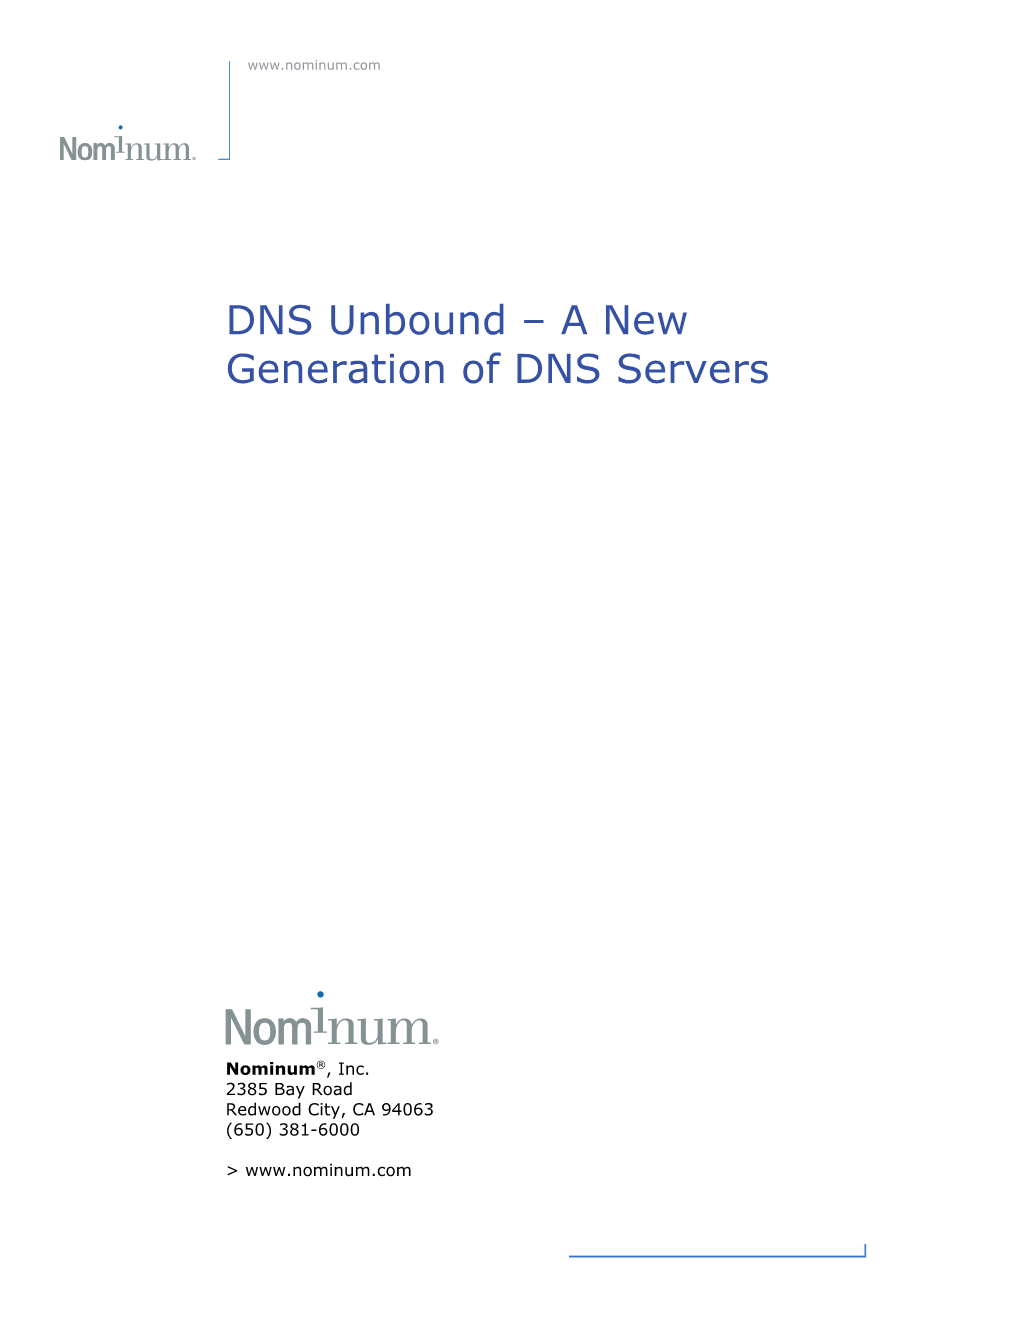 DNS Unbound – a New Generation of DNS Servers